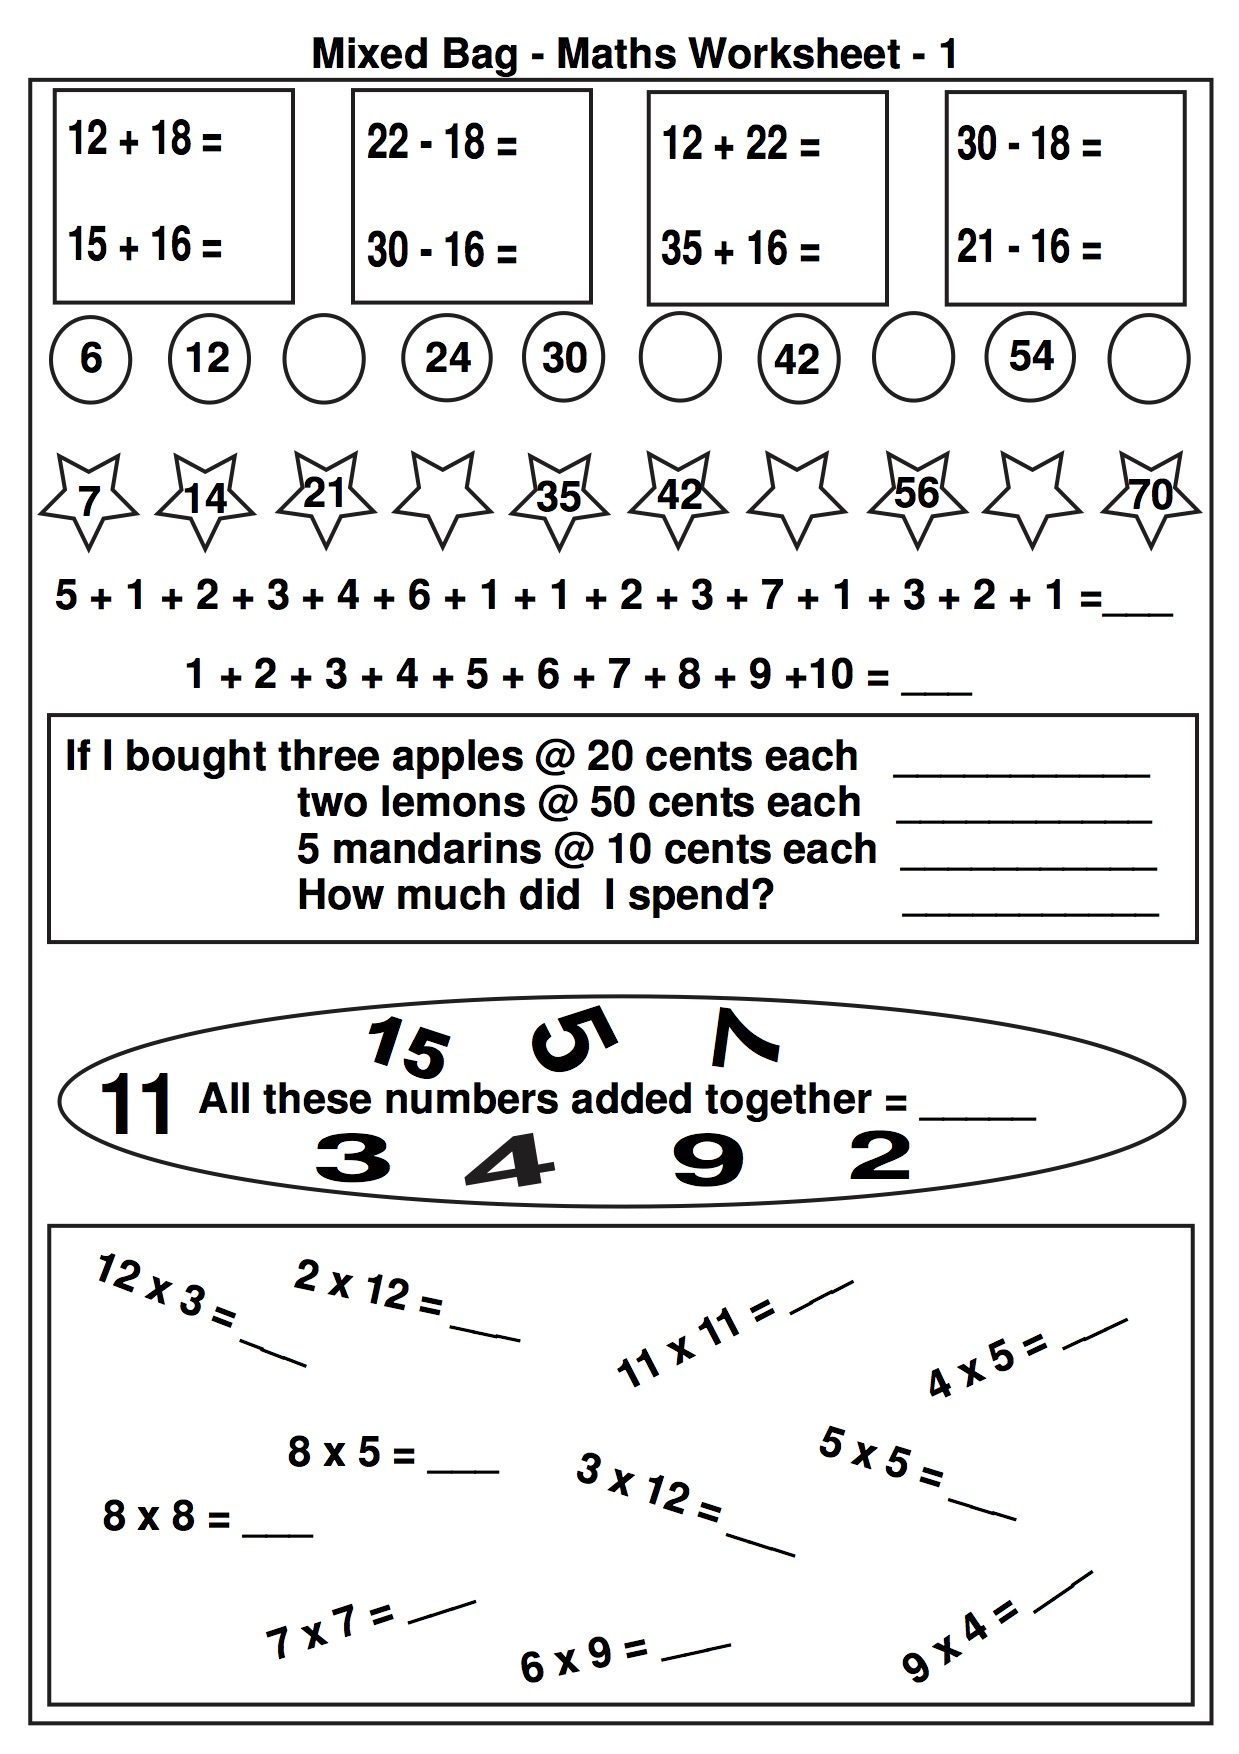 Free Math Worksheets And Printable Math Activities For Elementary | Free Primary Worksheets Printable